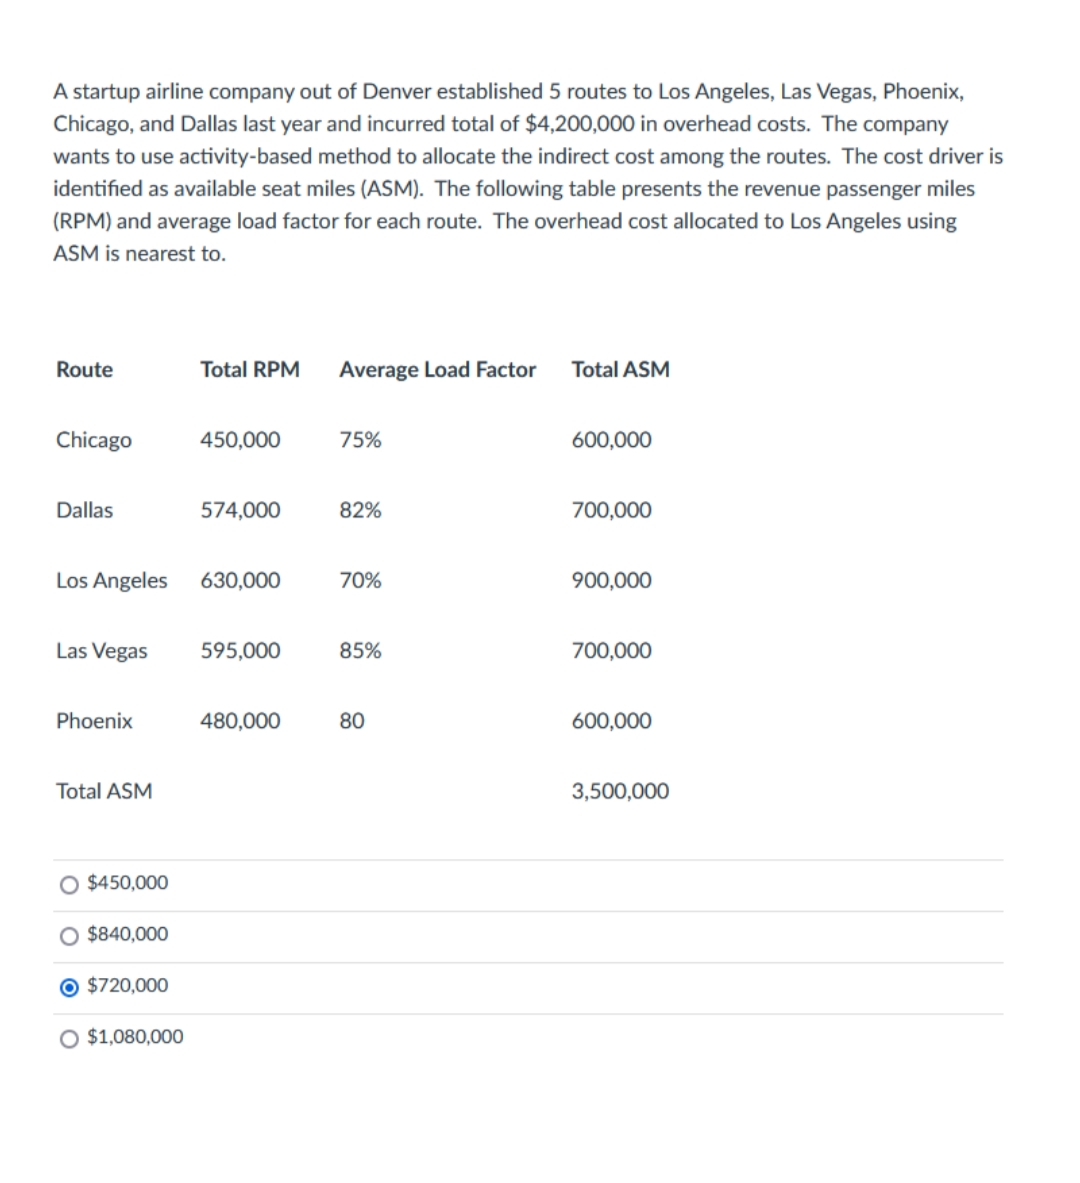 A startup airline company out of Denver established 5 routes to Los Angeles, Las Vegas, Phoenix,
Chicago, and Dallas last year and incurred total of $4,200,000 in overhead costs. The company
wants to use activity-based method to allocate the indirect cost among the routes. The cost driver is
identified as available seat miles (ASM). The following table presents the revenue passenger miles
(RPM) and average load factor for each route. The overhead cost allocated to Los Angeles using
ASM is nearest to.
Route
Total RPM
Average Load Factor
Total ASM
Chicago
450,000
75%
600,000
Dallas
574,000
82%
700,000
Los Angeles
630,000
70%
900,000
Las Vegas
595,000
85%
700,000
Phoenix
480,000
80
600,000
Total ASM
3,500,000
O $450,000
$840,000
O $720,000
O $1,080,000
